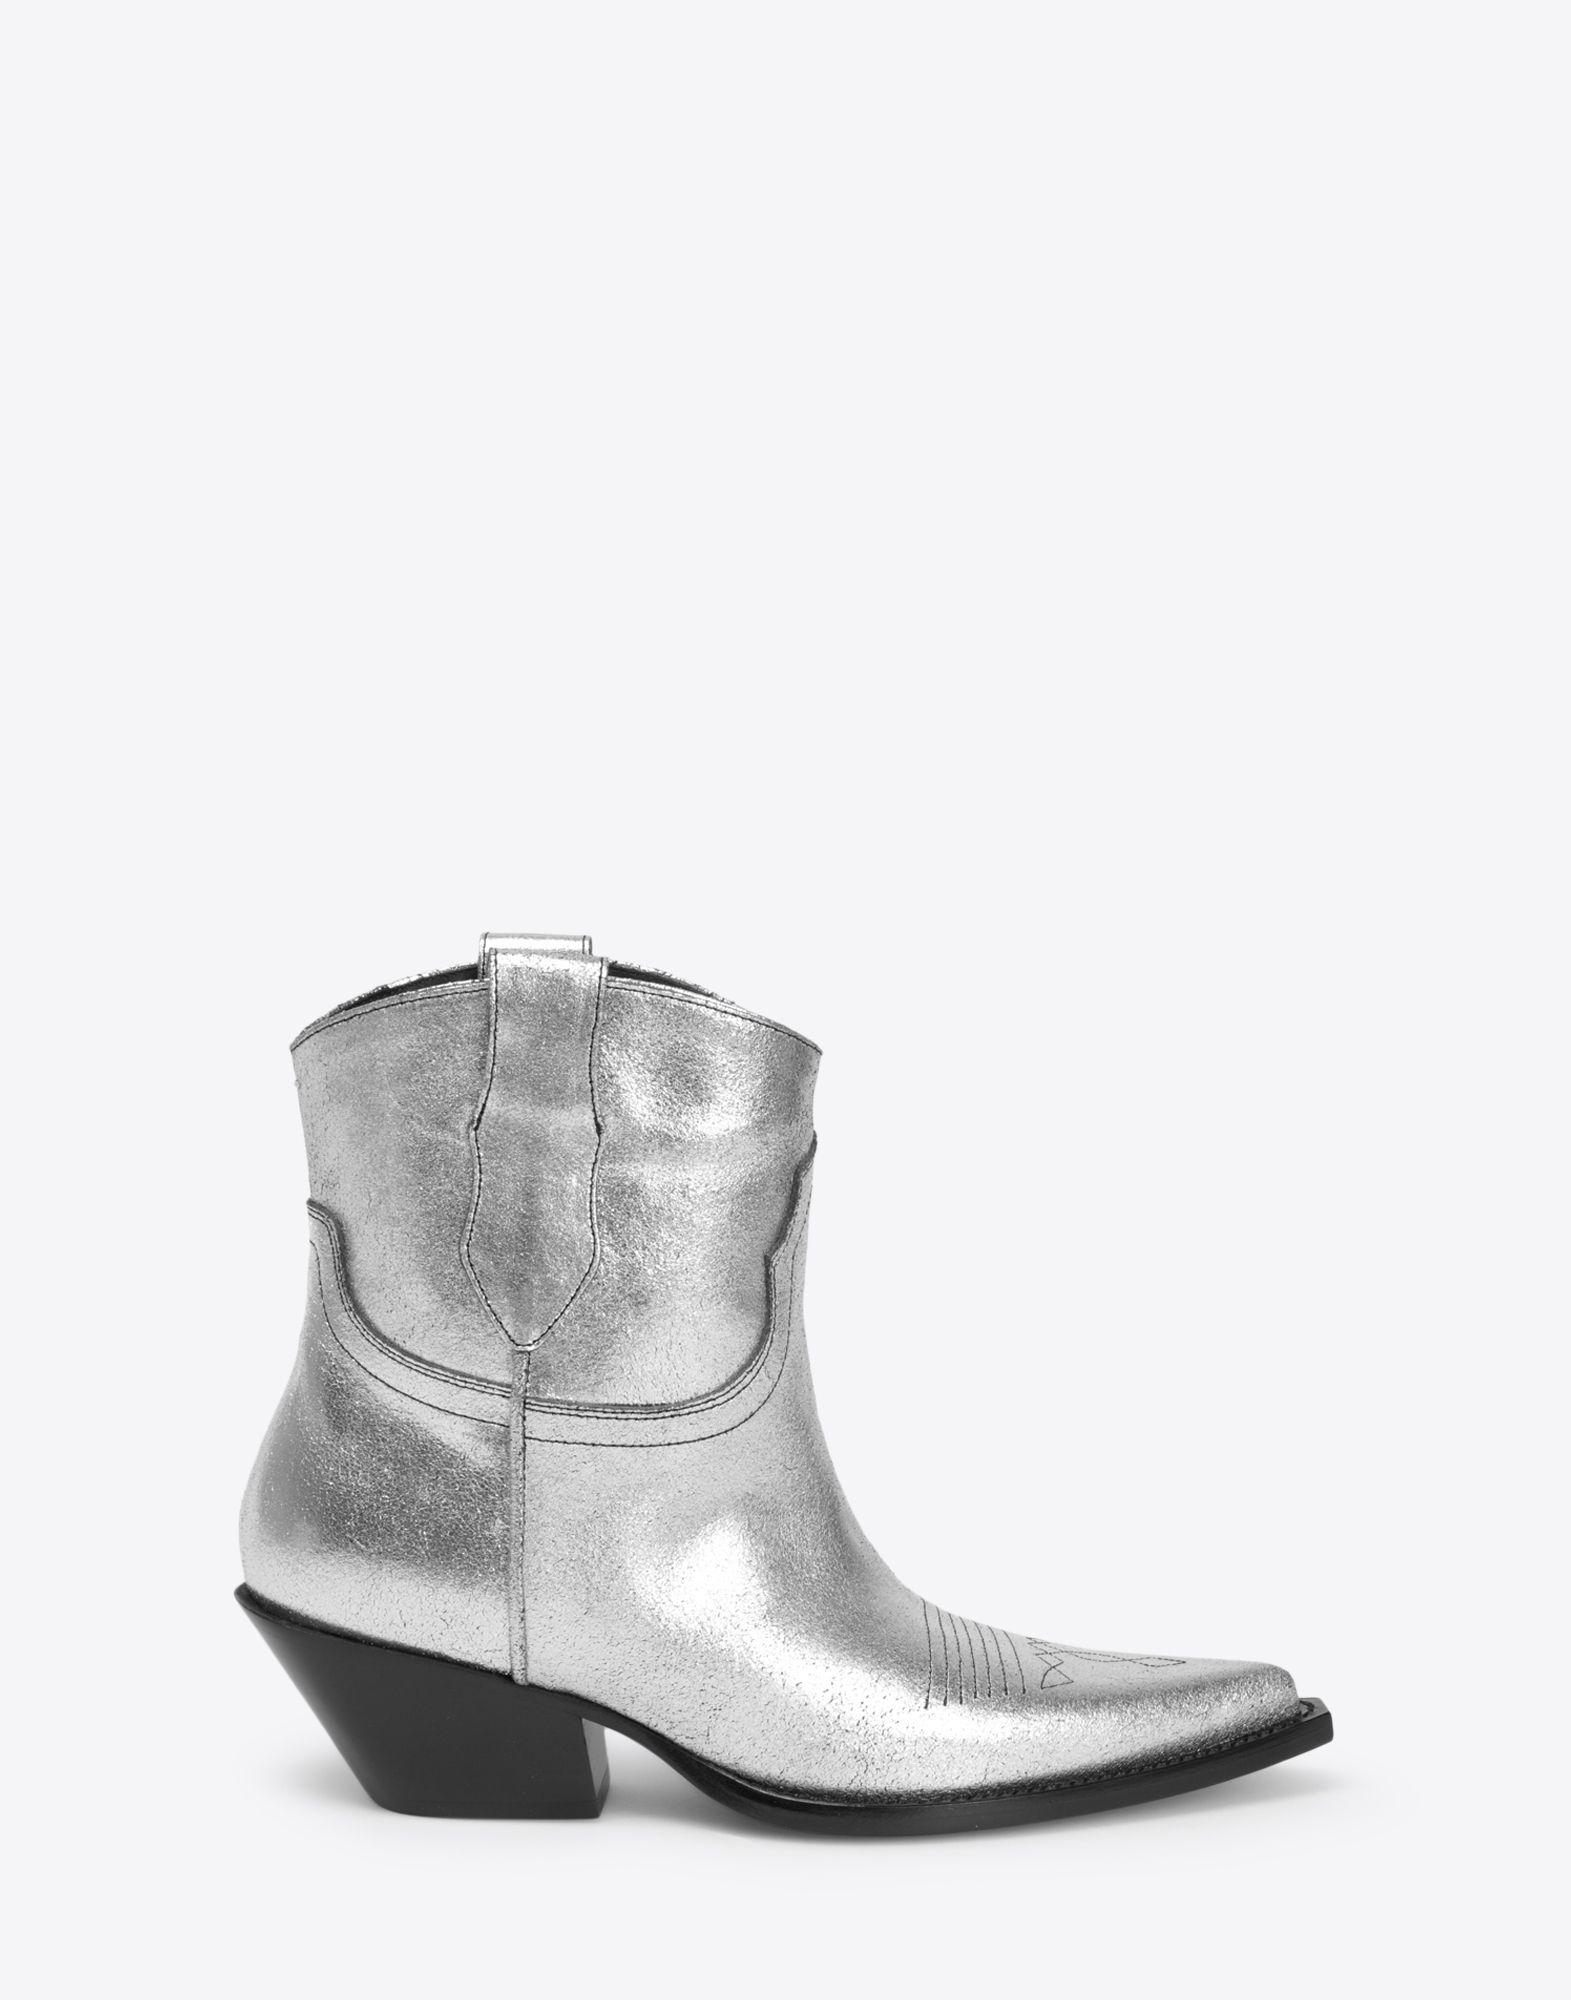 Maison Margiela Leather Silver Cowboy Boots in Metallic - Lyst